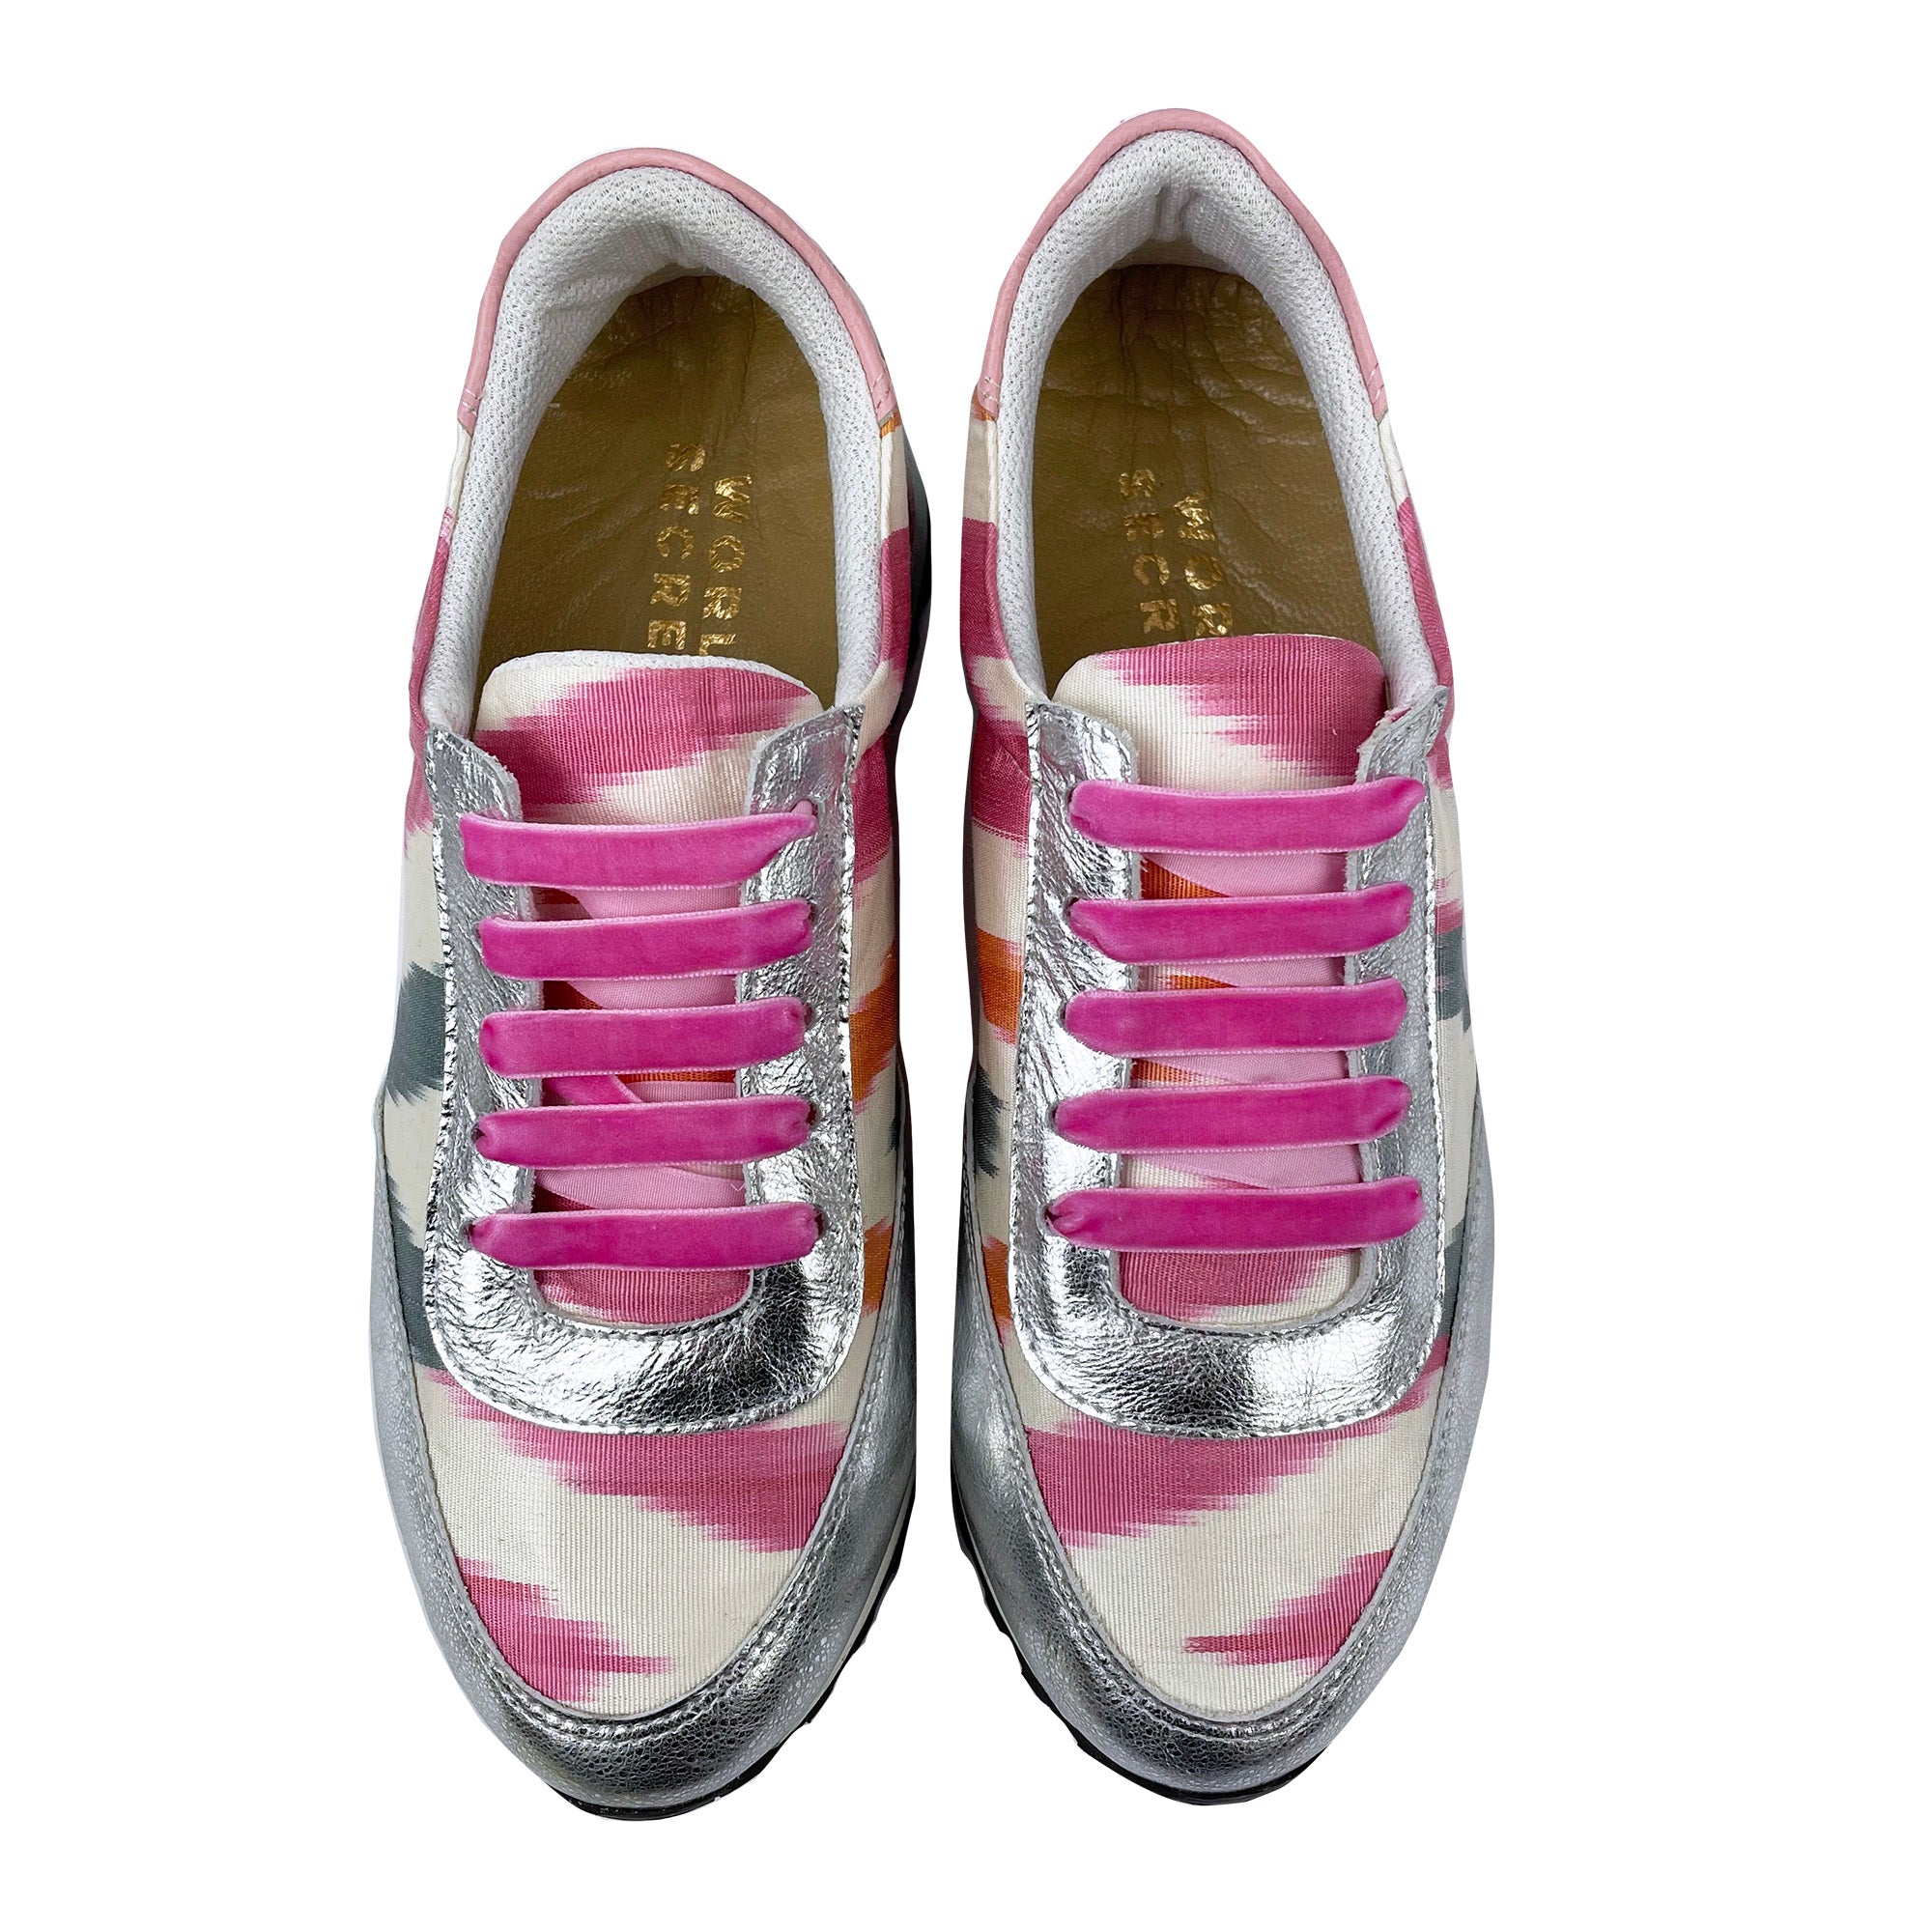 Pink, orange and grey Ikat silk 'Mighty Morphin' trainers with silver metallic leather and candy pink shoelaces